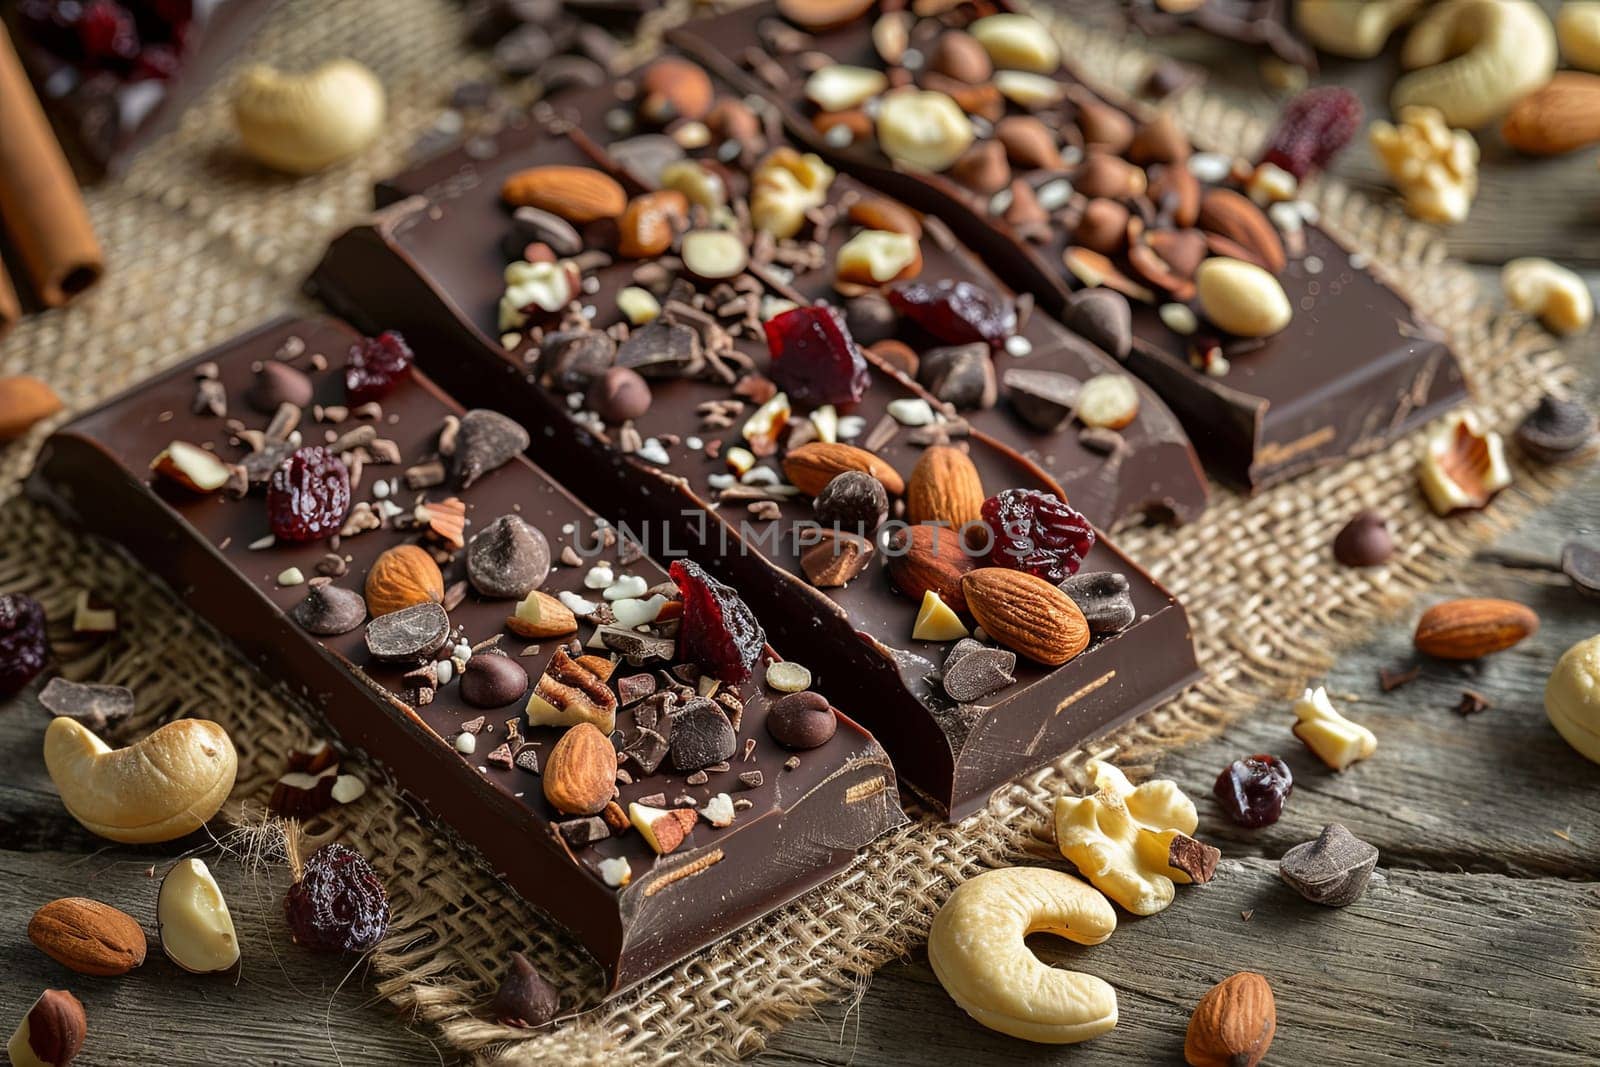 Detailed close-up of a chocolate bar filled with various nuts, showcasing rich textures and natural ingredients.